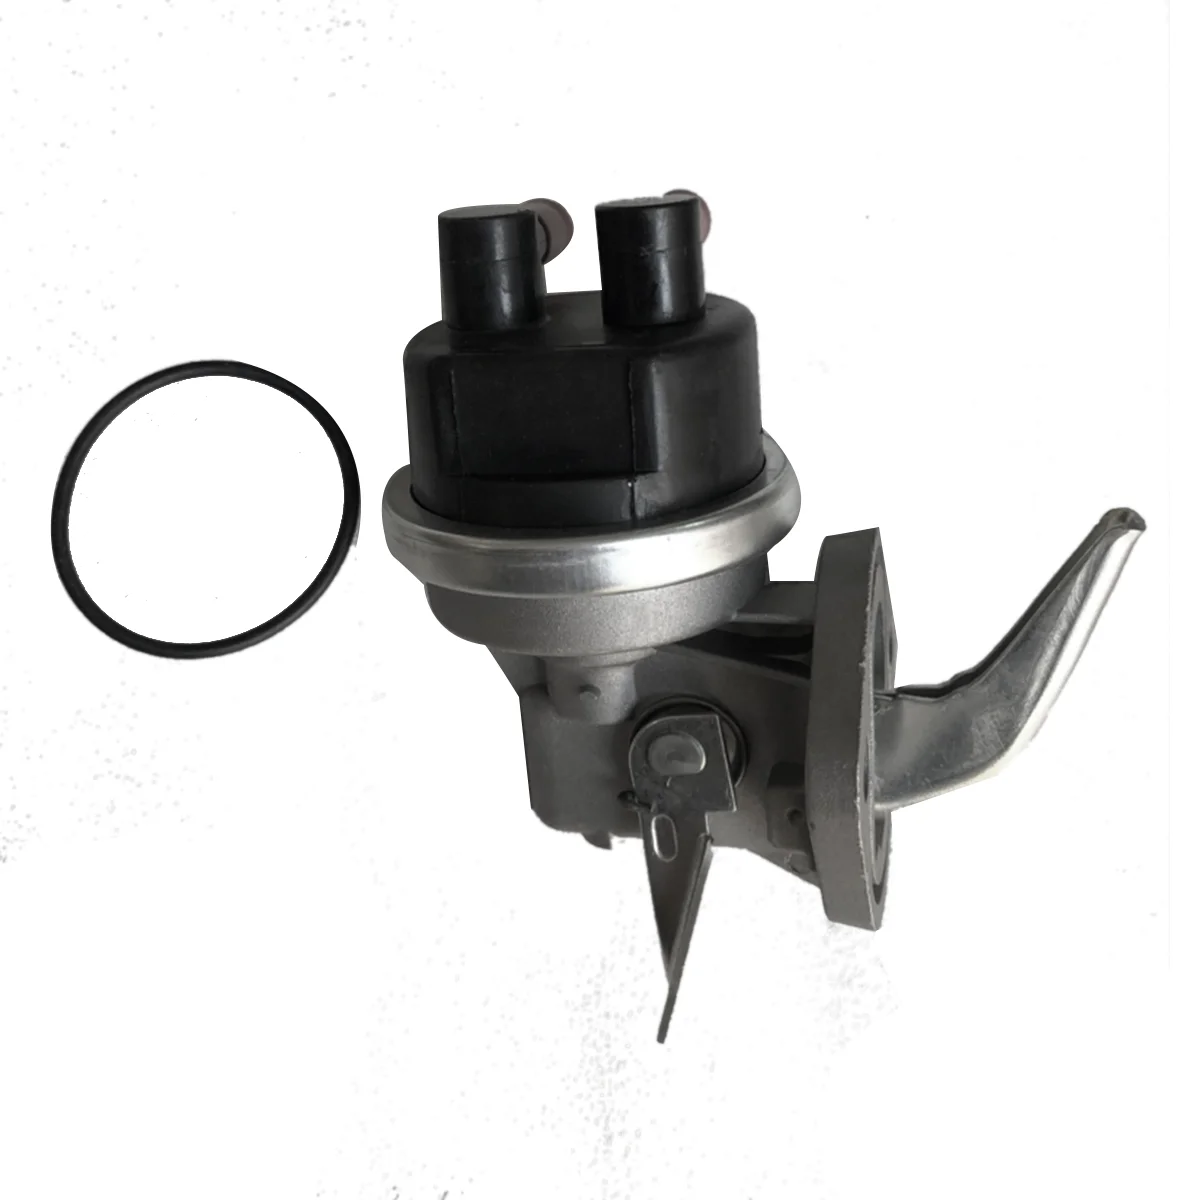 

RE38009 Fuel Pump Oil Delivery Pump Hand Oil Pump for Tractor 1350 1550 1750 1850 1950 2250 2450 2650 2850